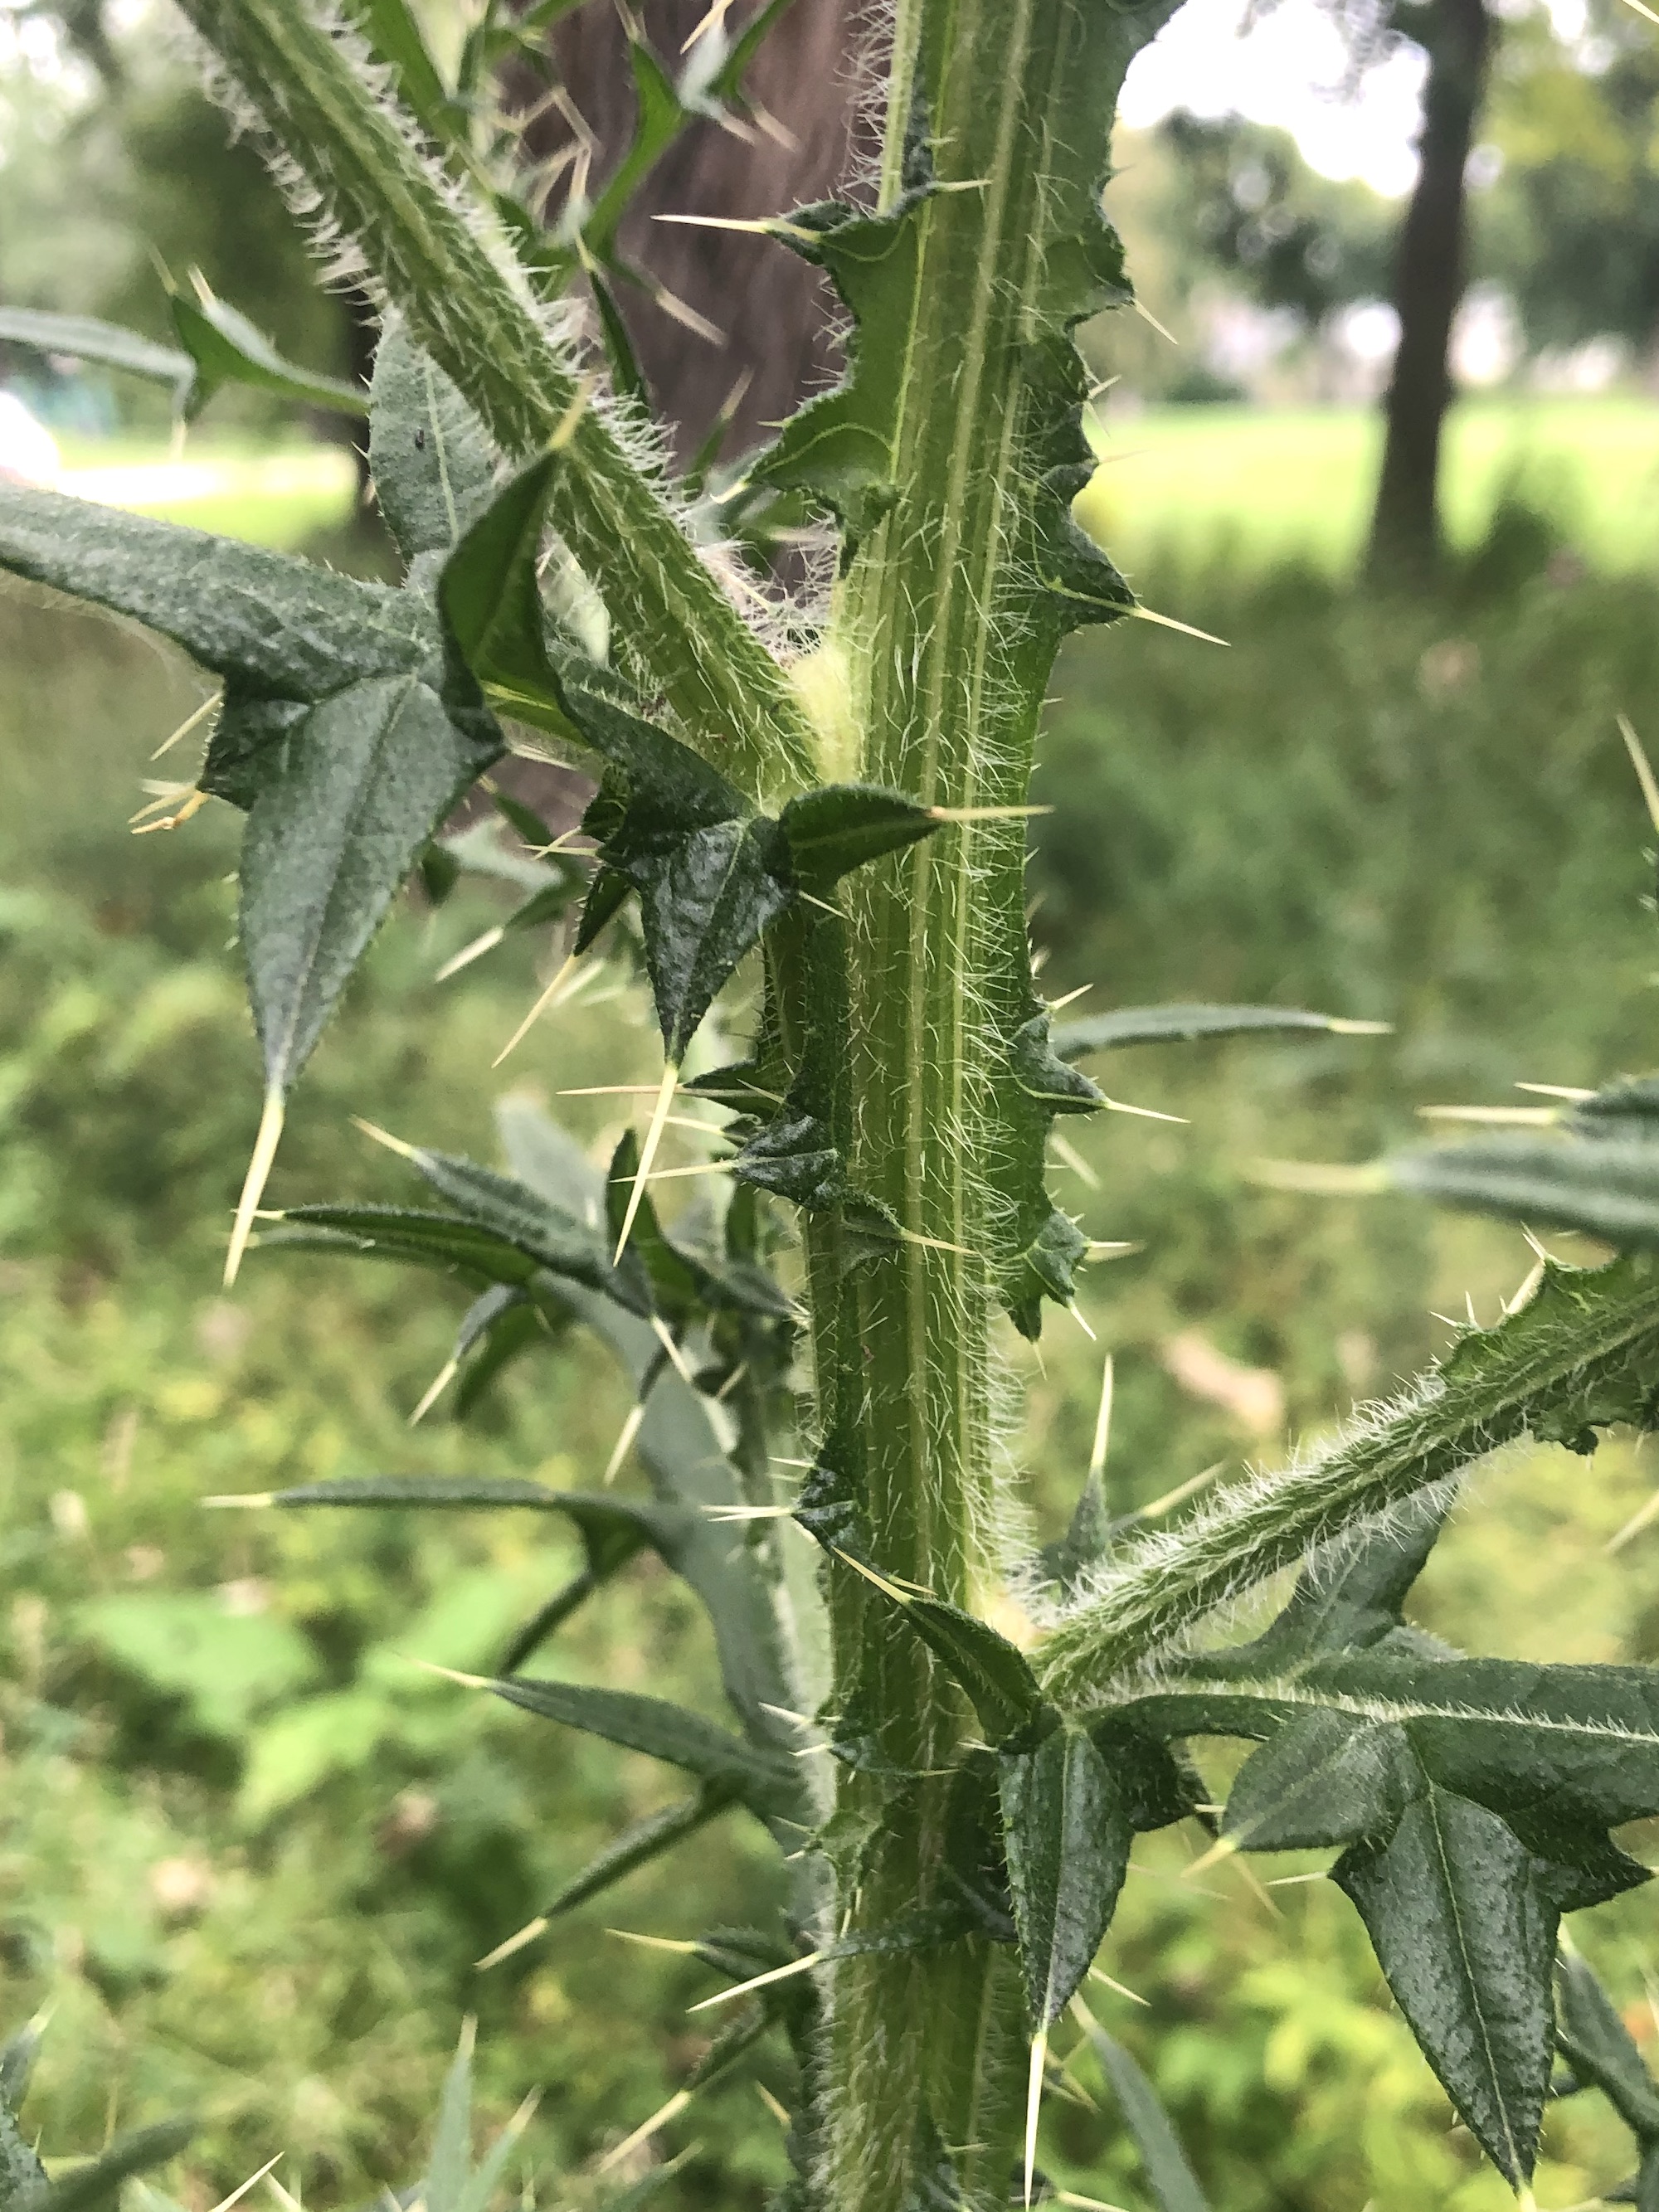 Bull Thistle growing in Wingra Park in Madison, Wisconsin on August 13, 2022.